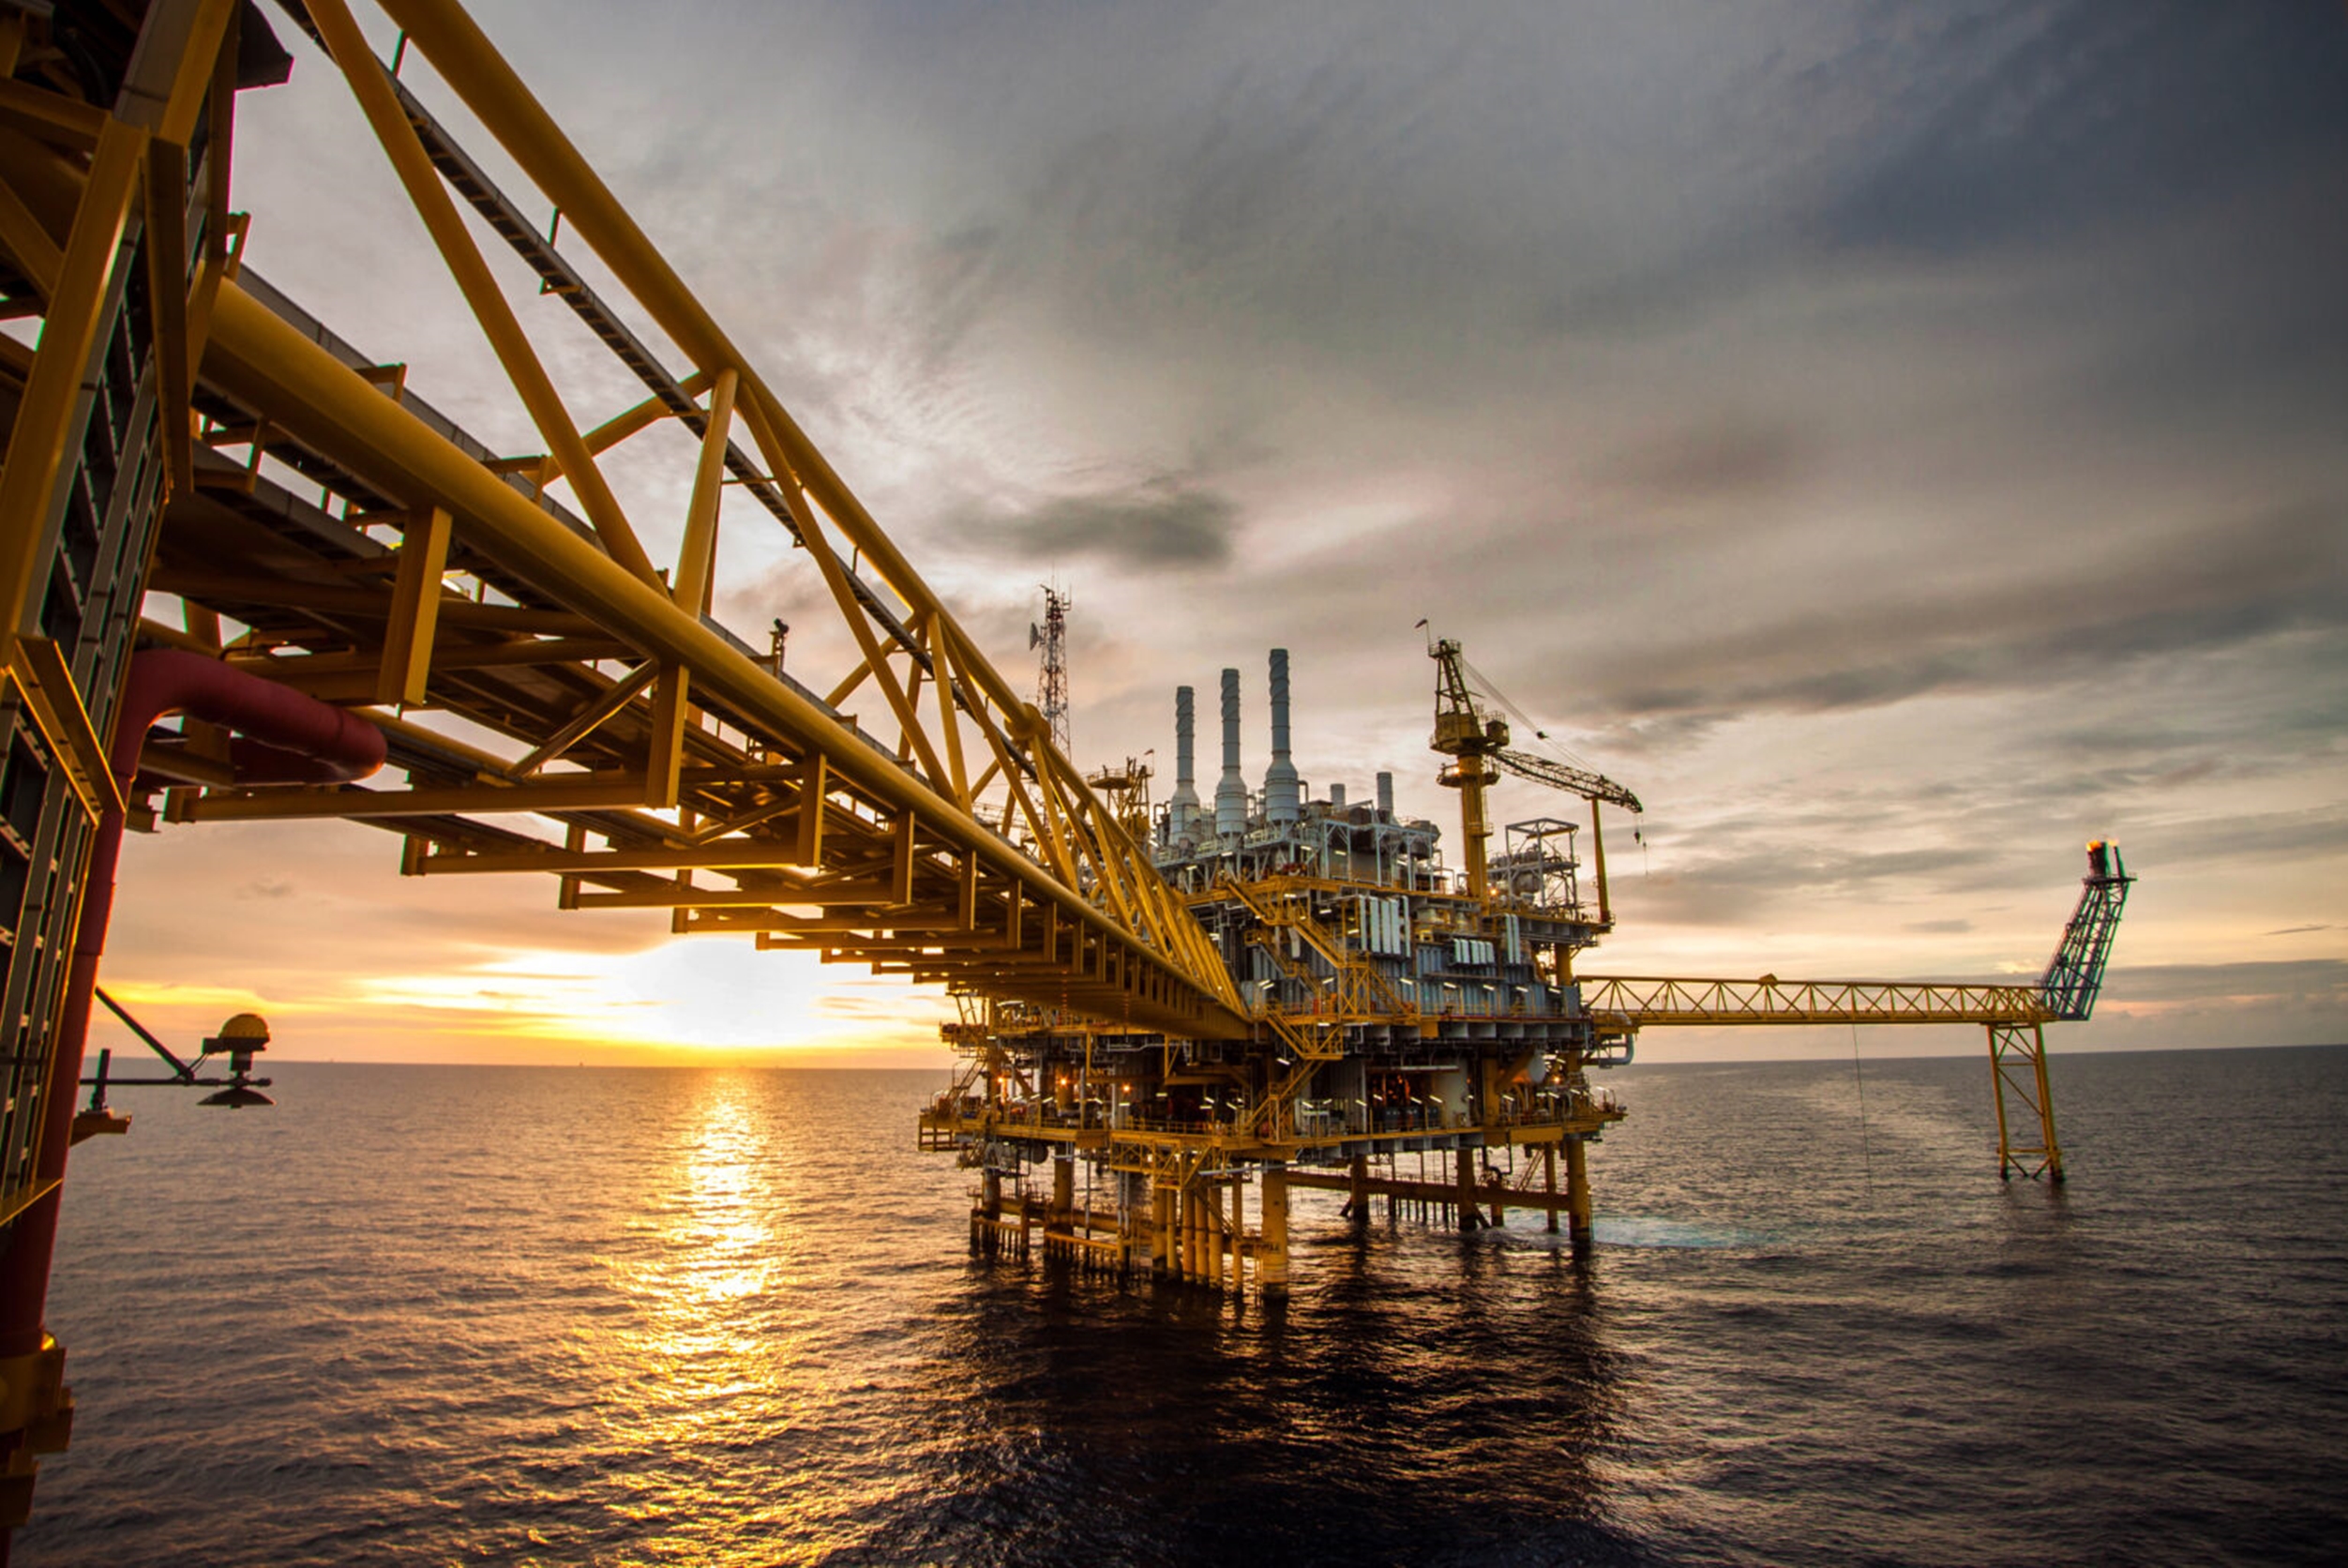 Oil and gas exploration on the rise in Africa